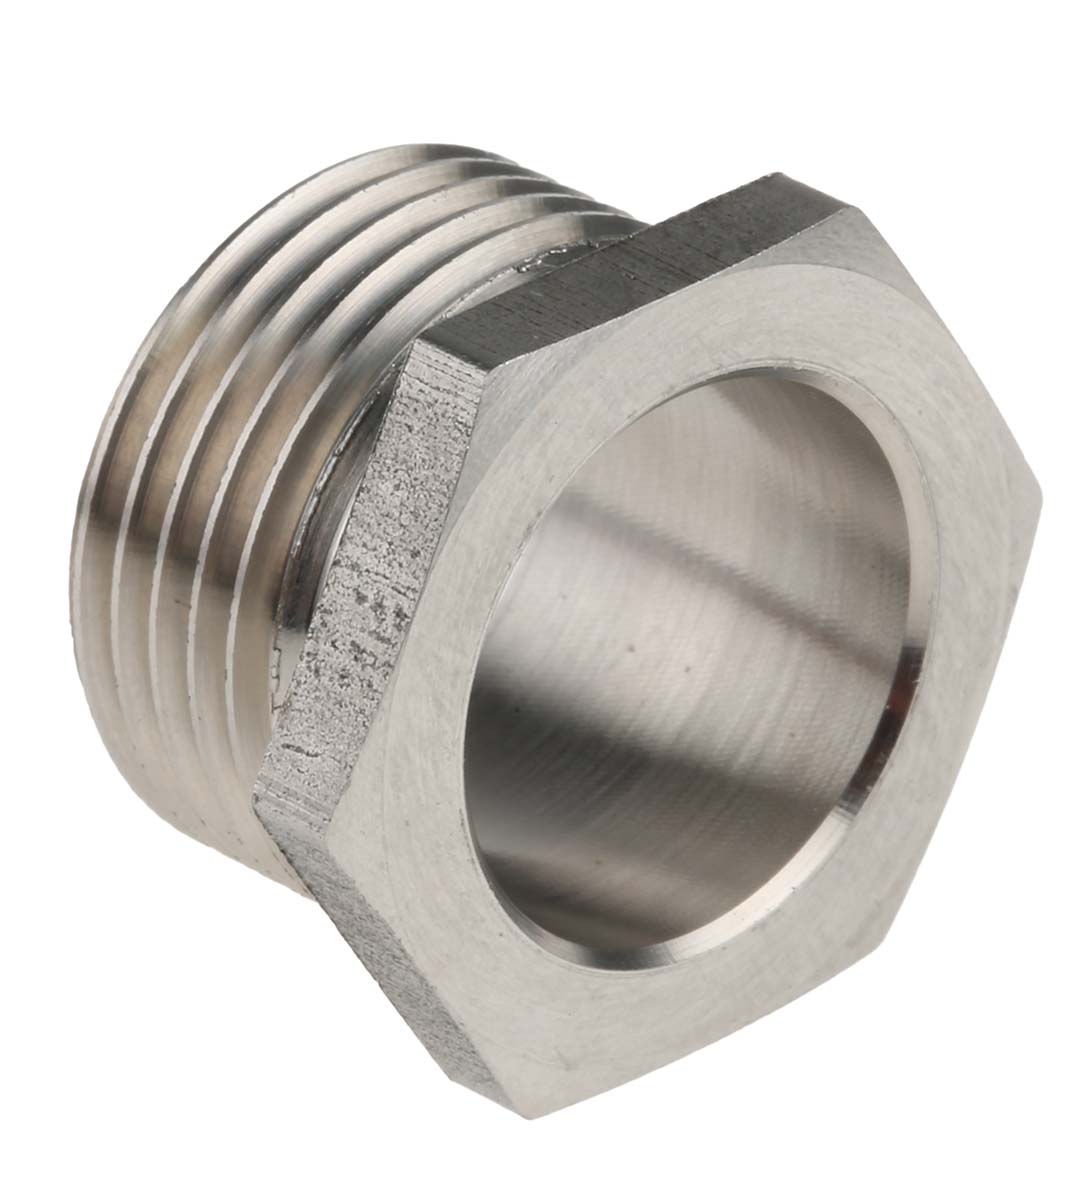 RS PRO Male Bush, Conduit Fitting, 20mm Nominal Size, 316 Stainless Steel, Silver